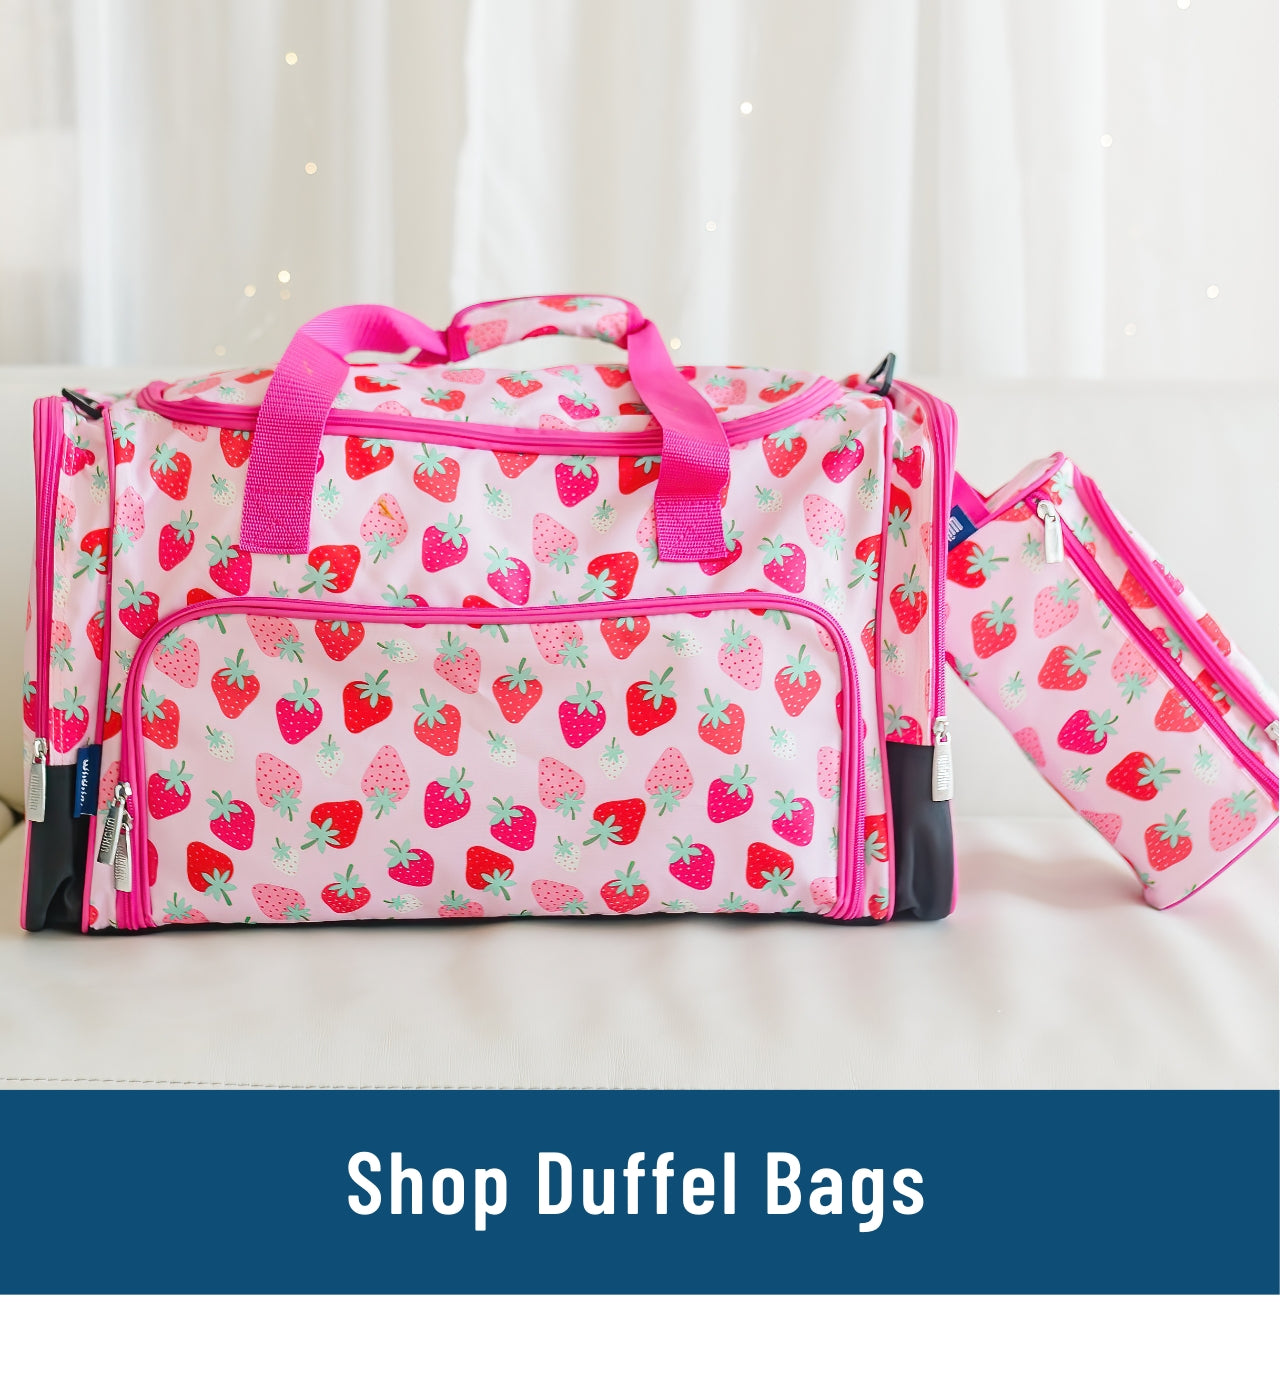 Image of strawberry duffel bag and matching toiletry bag. Link to shop duffel bags.